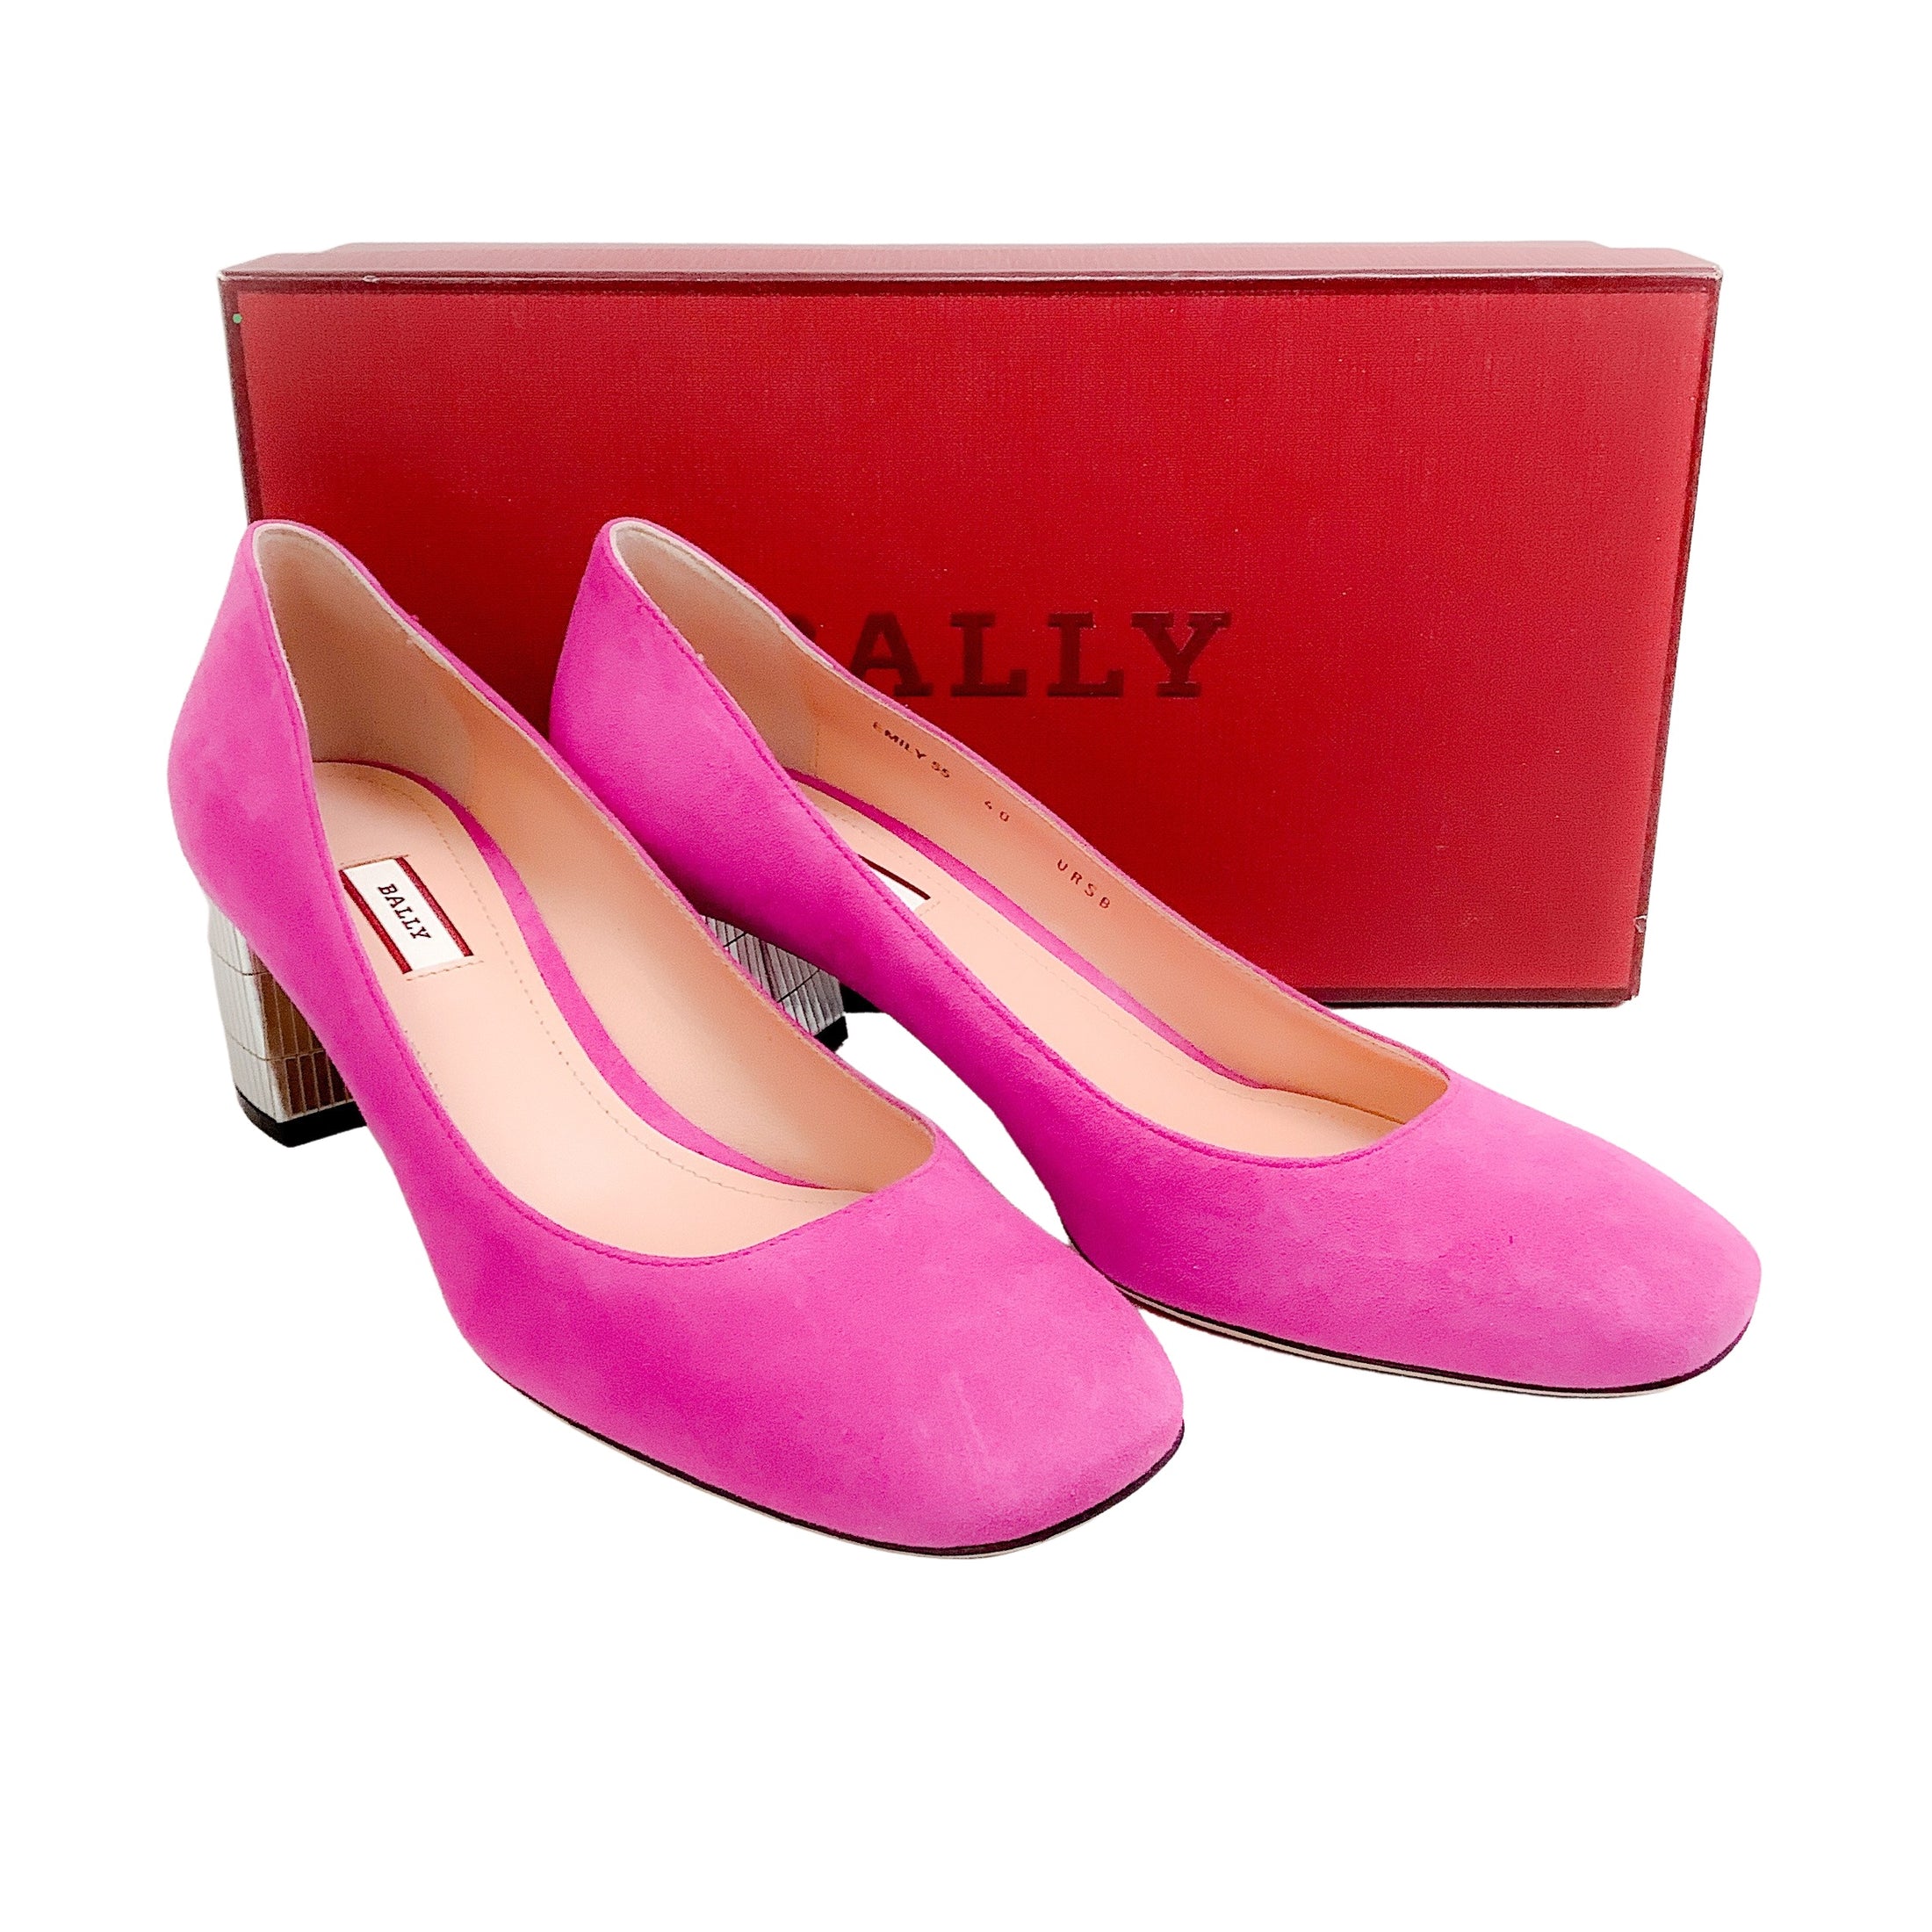 Bally Pink Suede Emily Pumps With Silver Block Heel